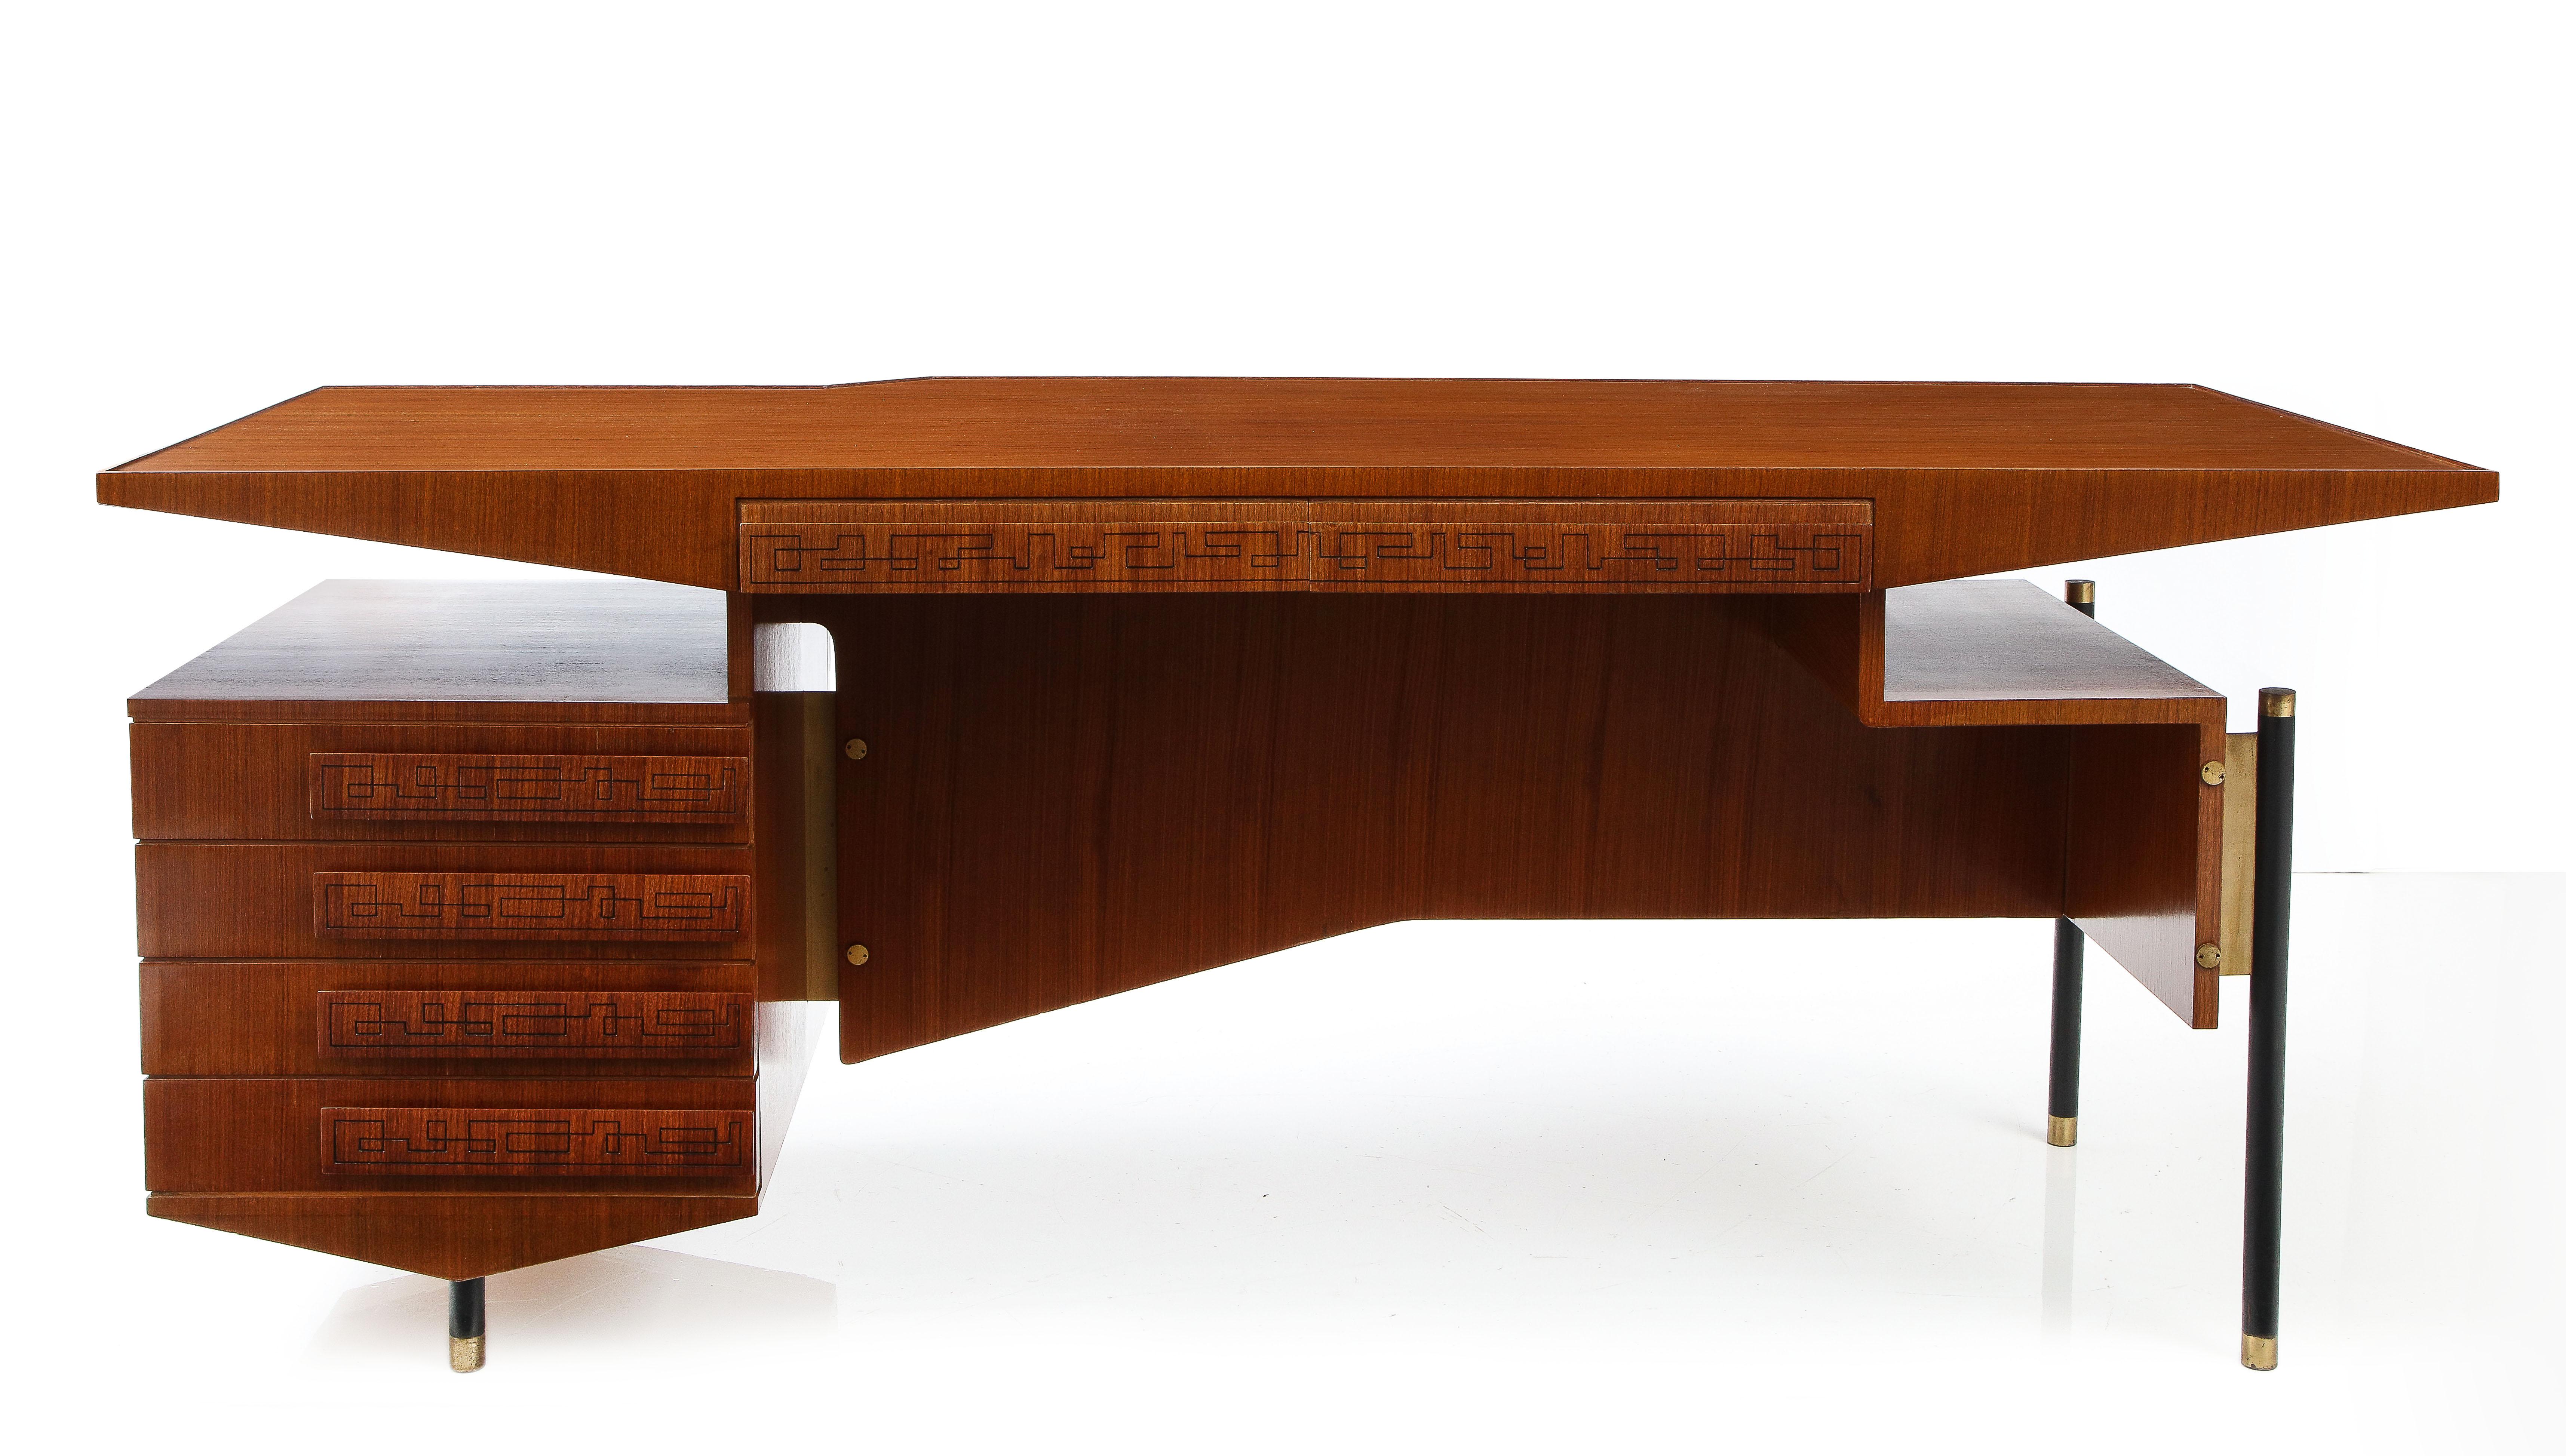 Impressive, striking desk in the style of Ico Parisi. Beautiful Grecian details carved into the walnut of the drawers, with smart steel legs capped with brass feet.